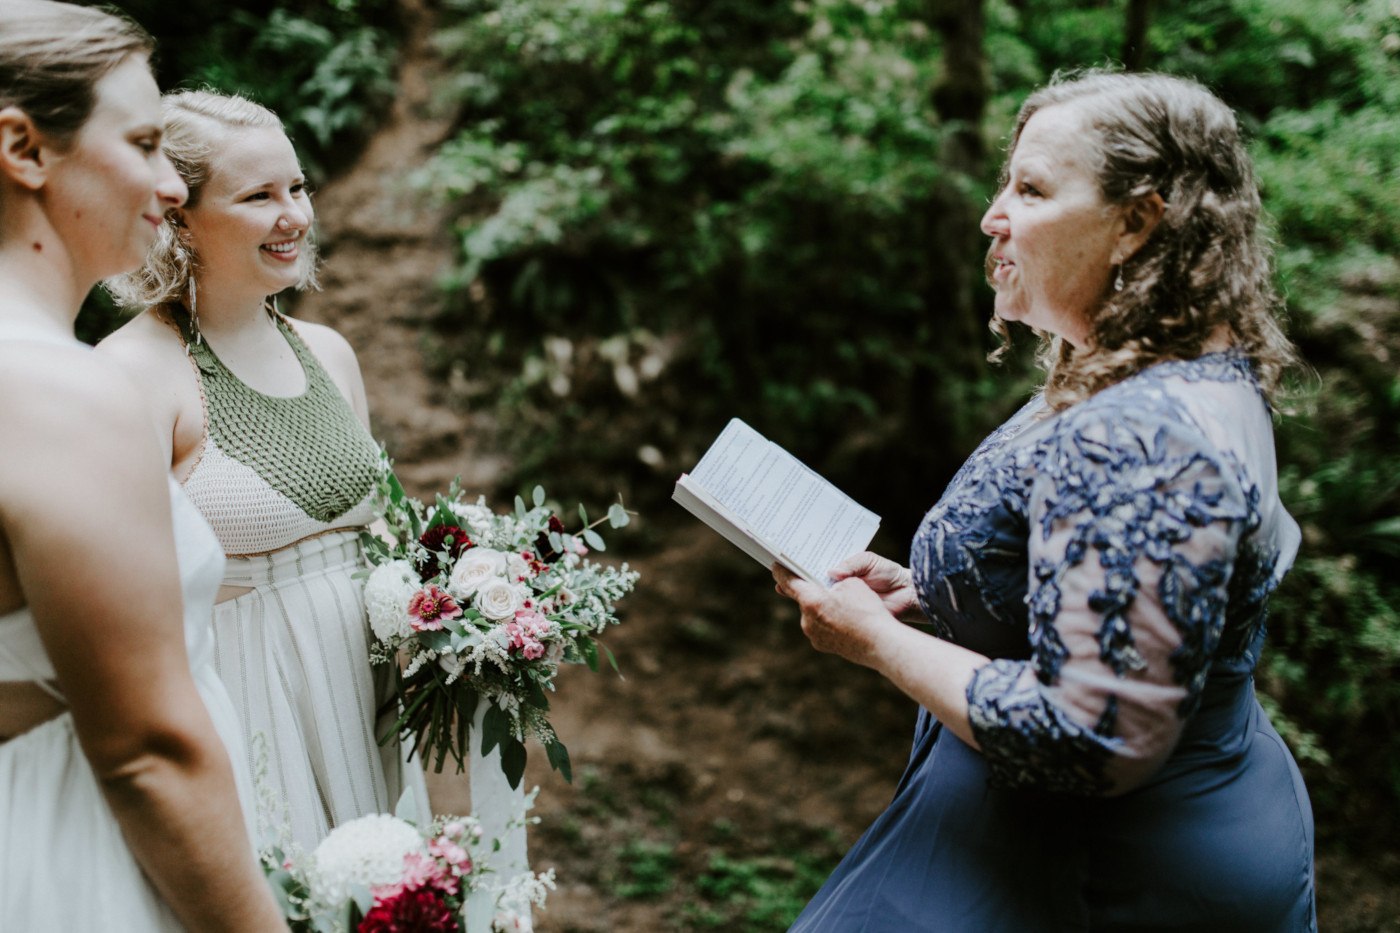 Kate's mom officiates Kate and Audrey's elopement. Elopement wedding photography at Bridal Veil Falls by Sienna Plus Josh.